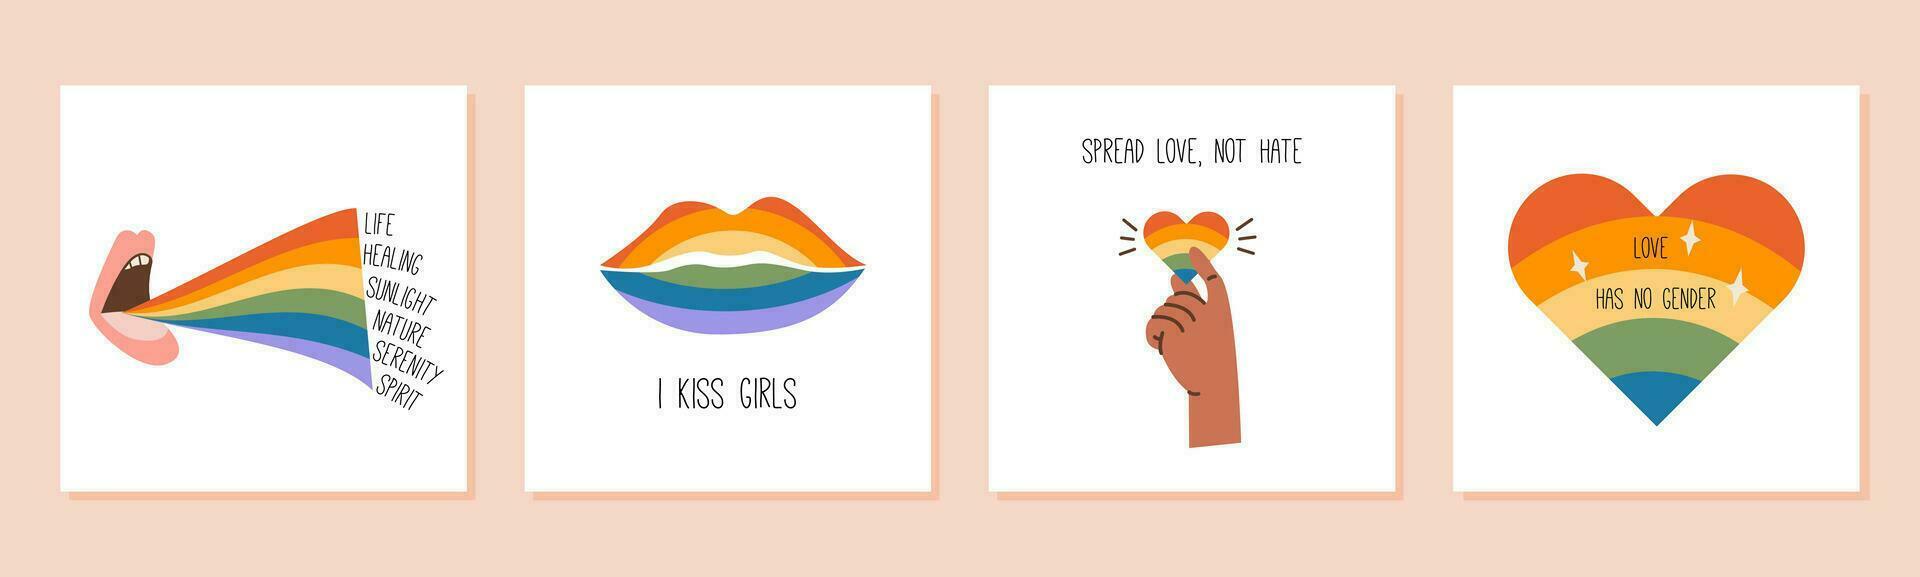 Pride month square cards with rainbow, LGBTQ symbols, phrases and slogans. Set of queer social media post with distorted checkerboard on background. LGBT banner in retro groovy 60s 70s style. Vector. vector